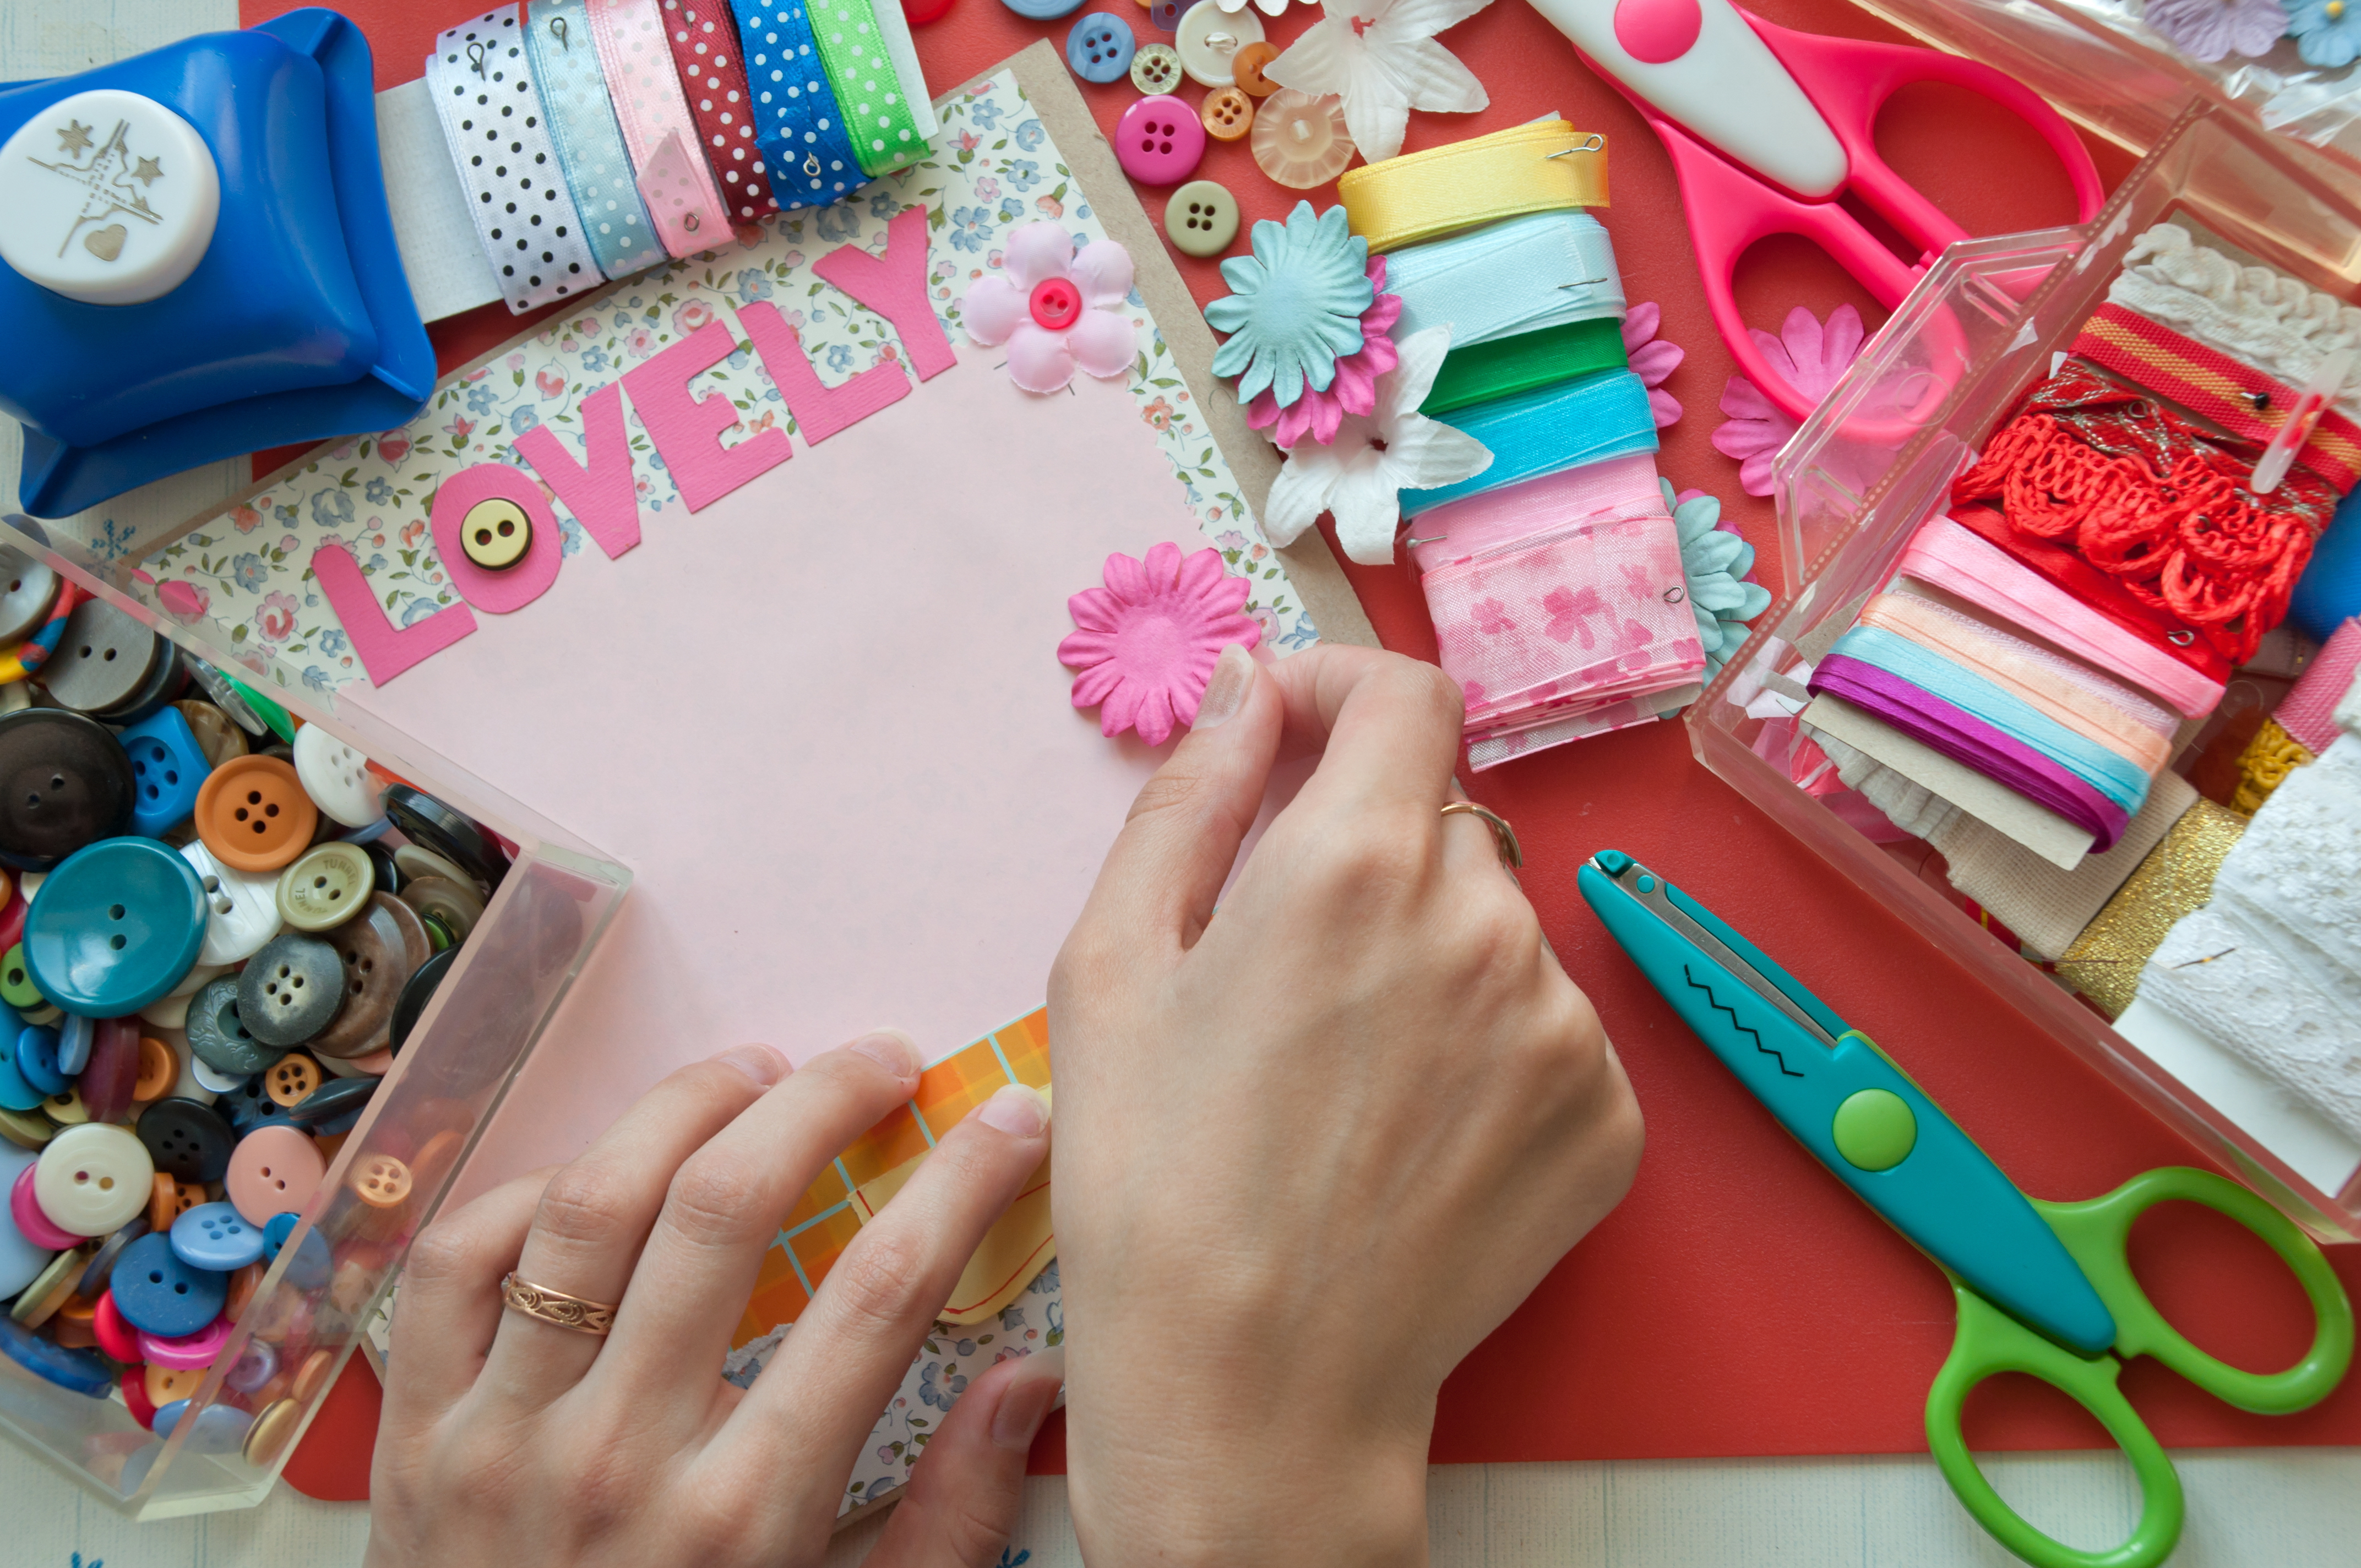 A woman's hands working with various colorful crafting supplies 